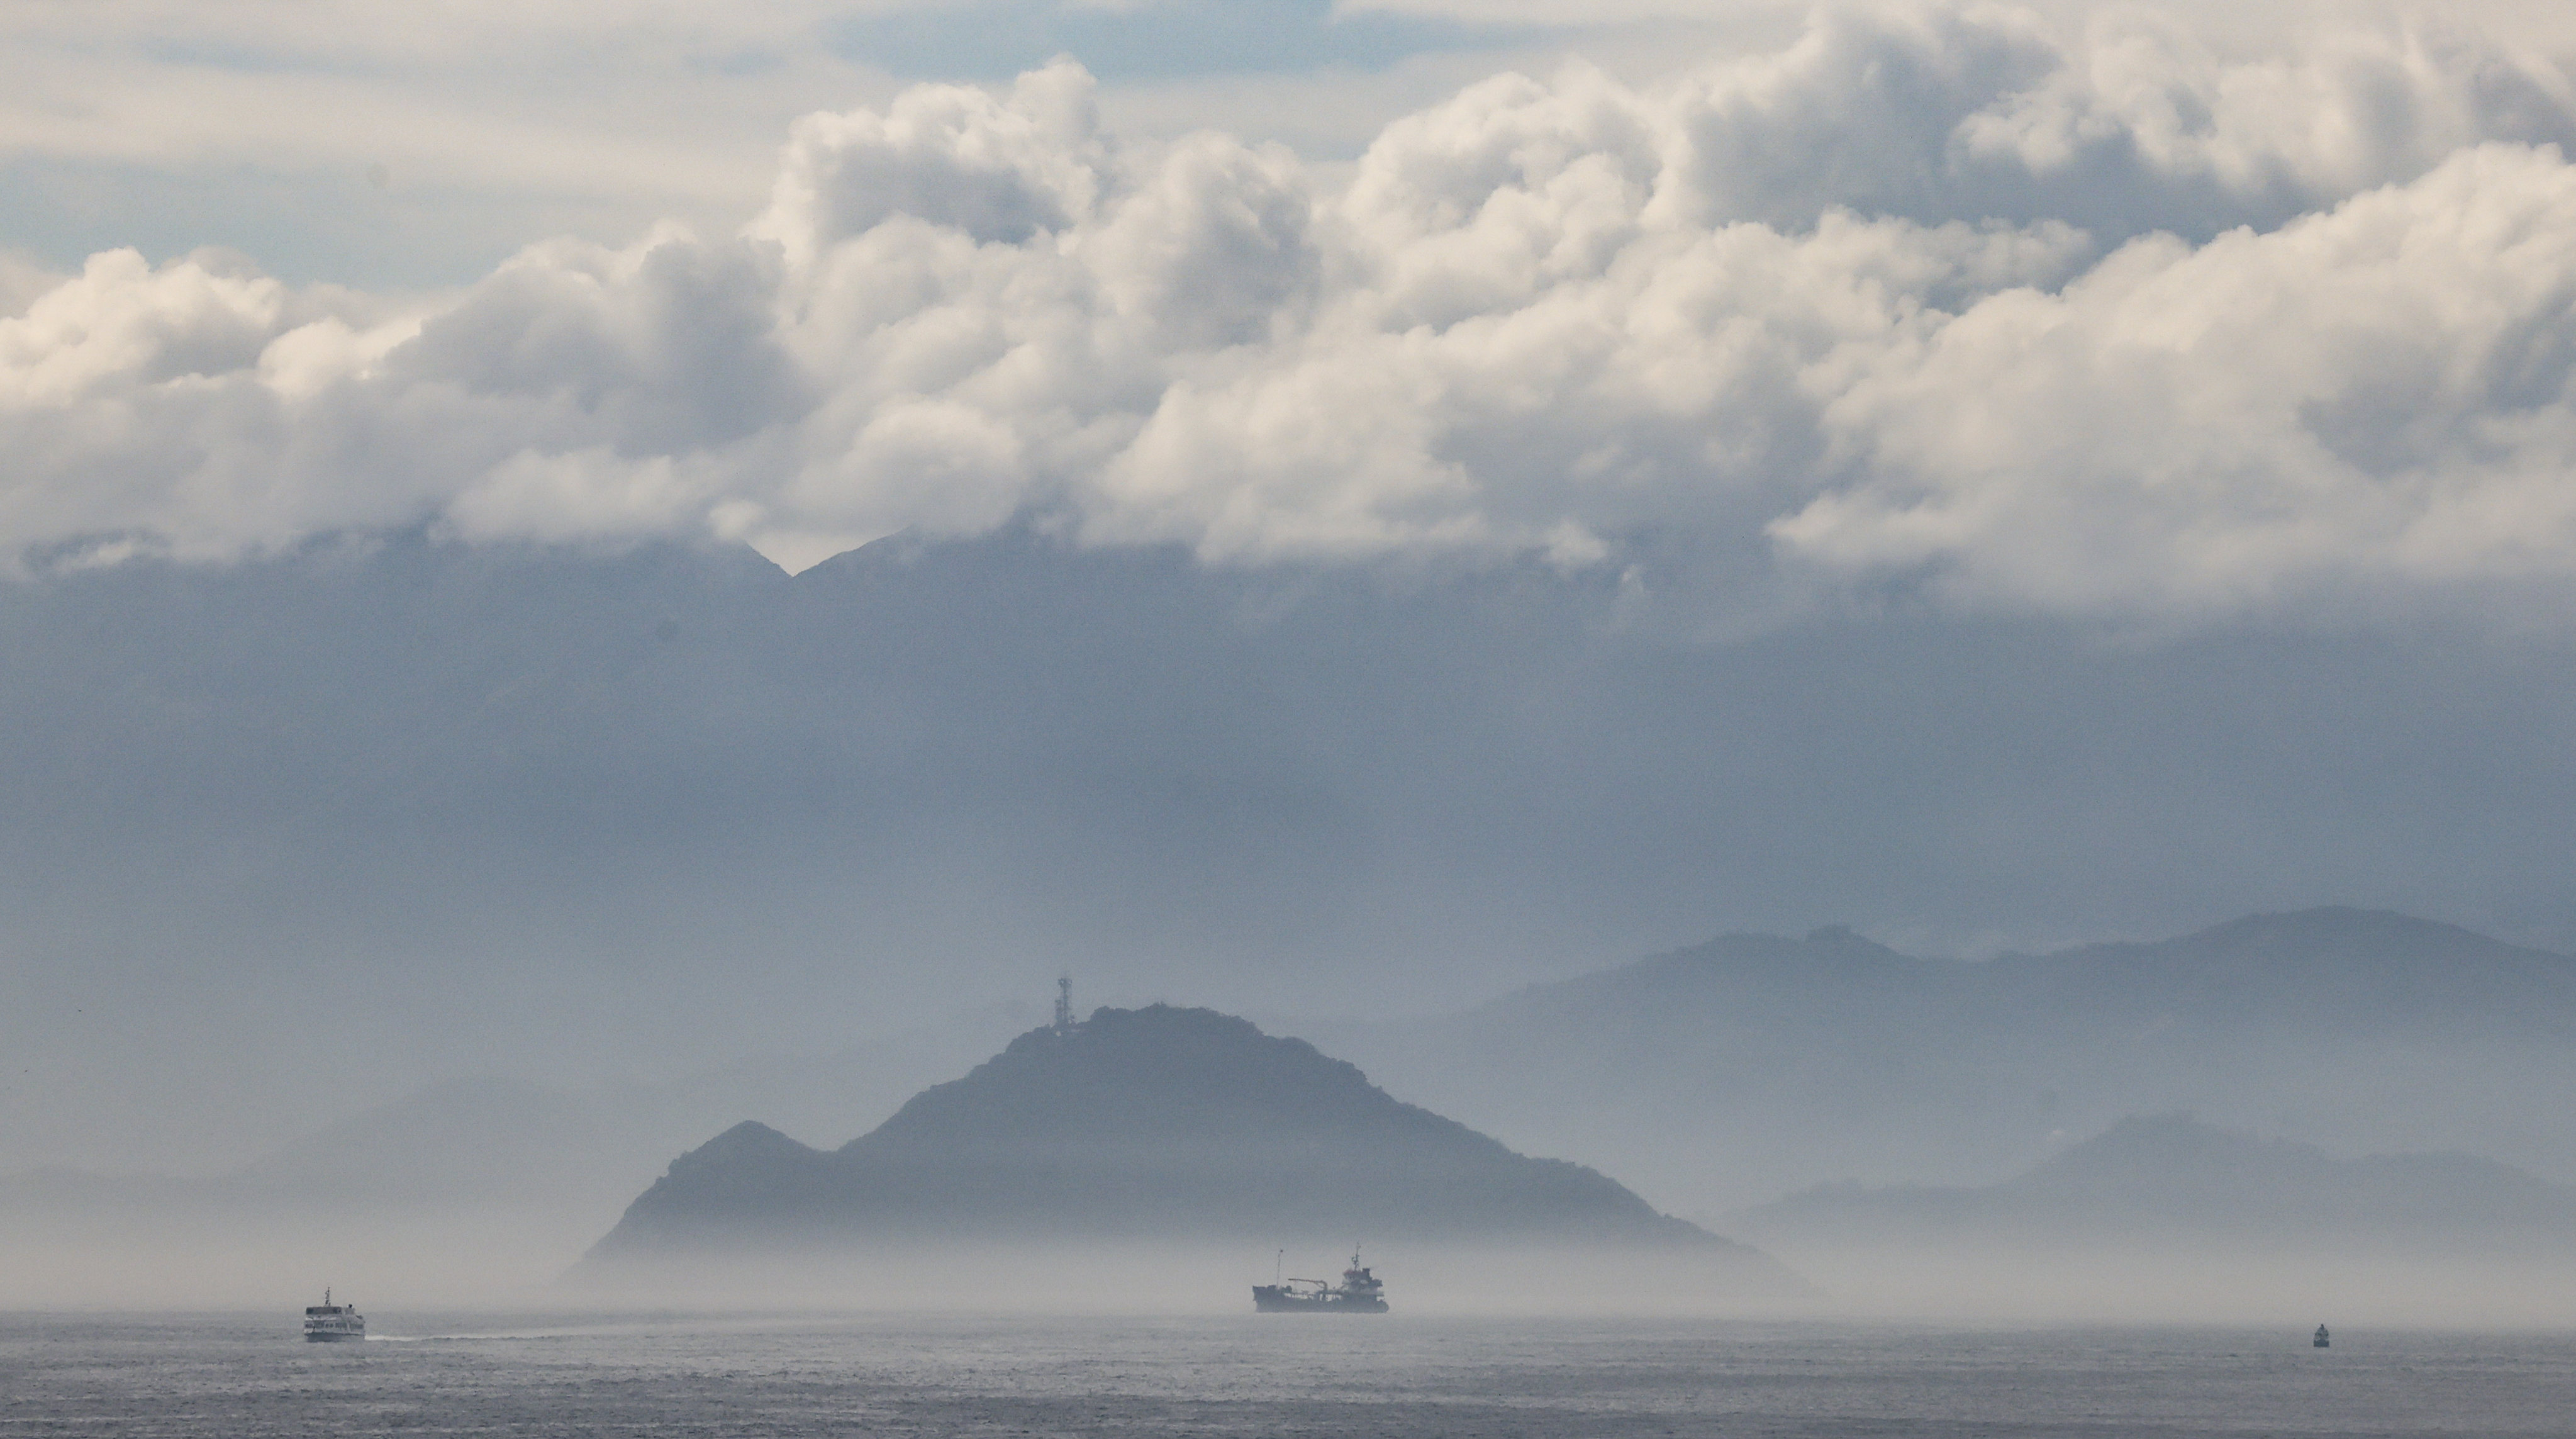 The sea facing Kau Yi Chau is shrouded in mist, on February 10. The Hong Kong government is planning massive reclamation around the island. Photo: Jelly Tse